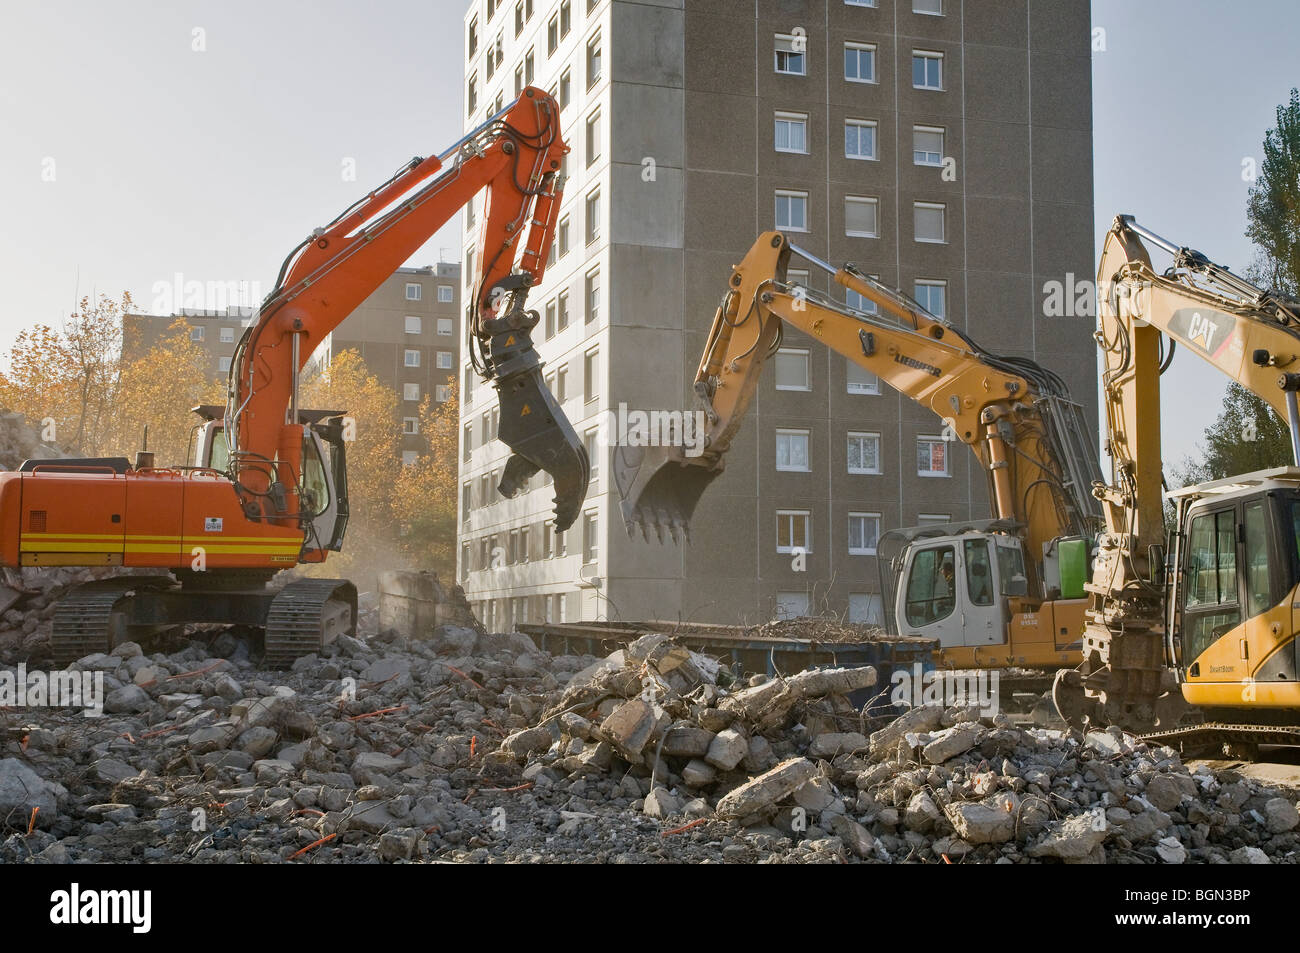 Three excavators in action on a building demolition site of HLM building, France Stock Photo